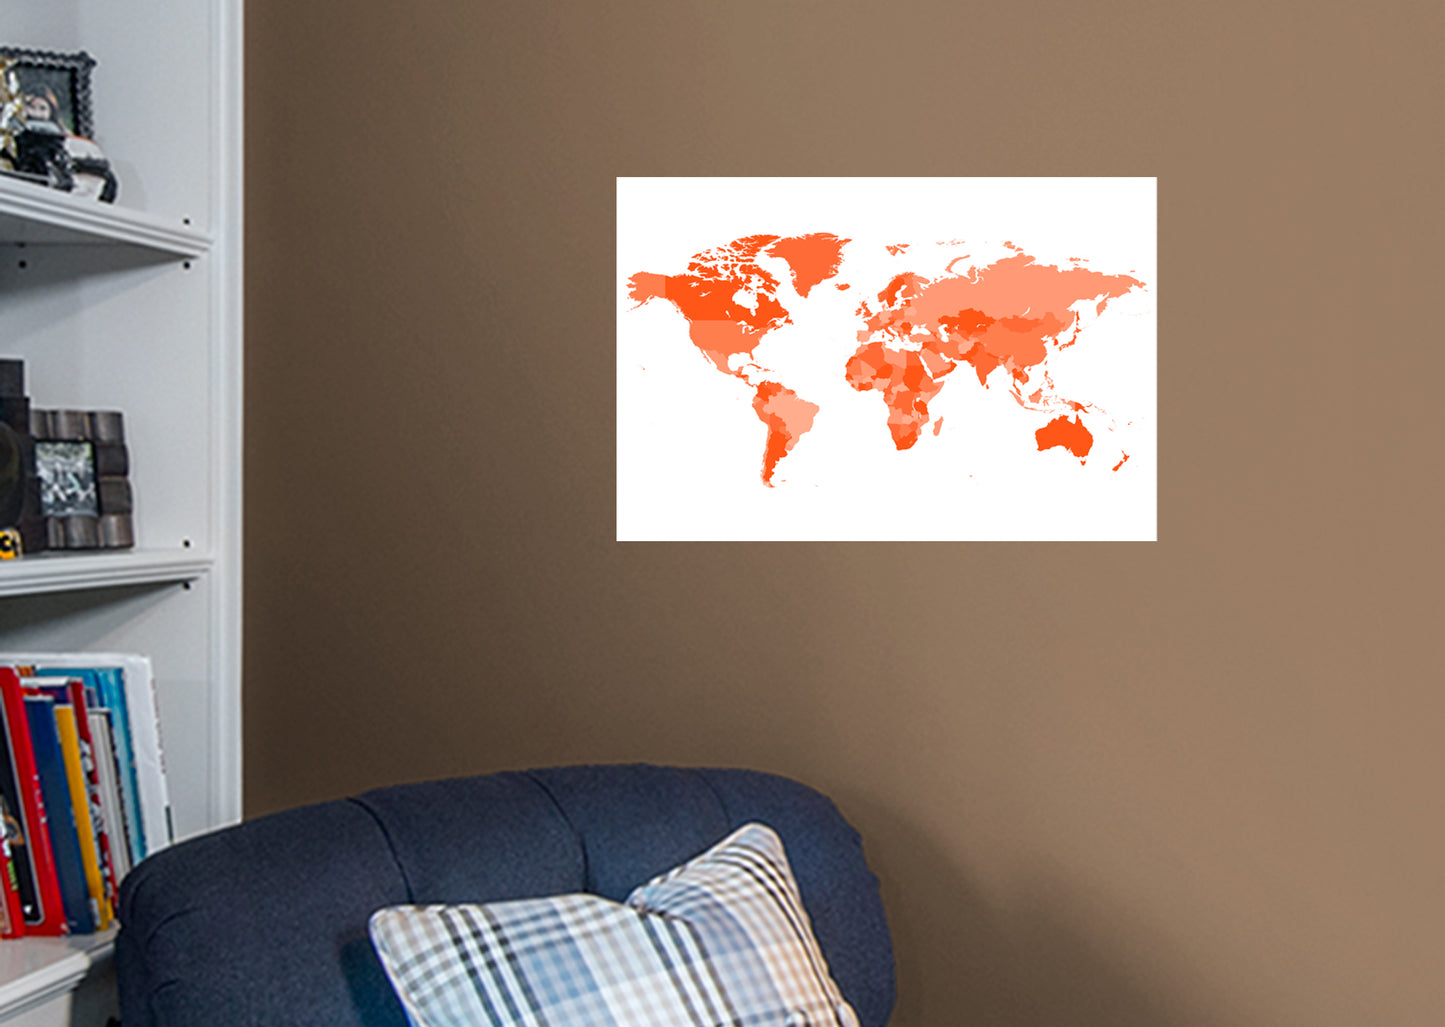 World Maps:  Red Map Mural        -   Removable Wall   Adhesive Decal